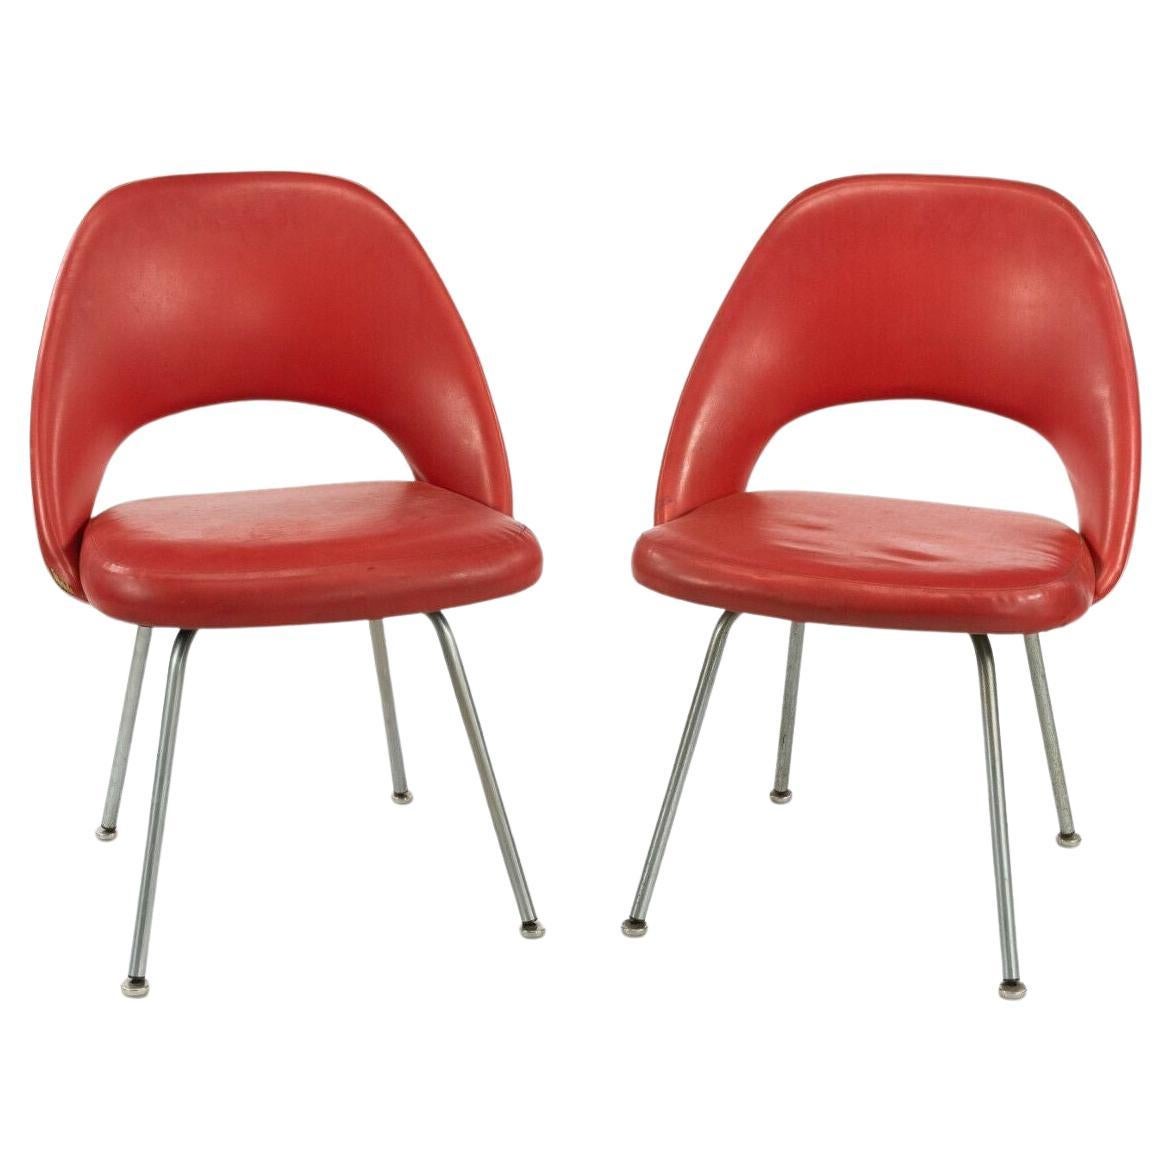 1963 Pair of Eero Saarinen for Knoll Red Vinyl Armless Executive Dining Chairs For Sale